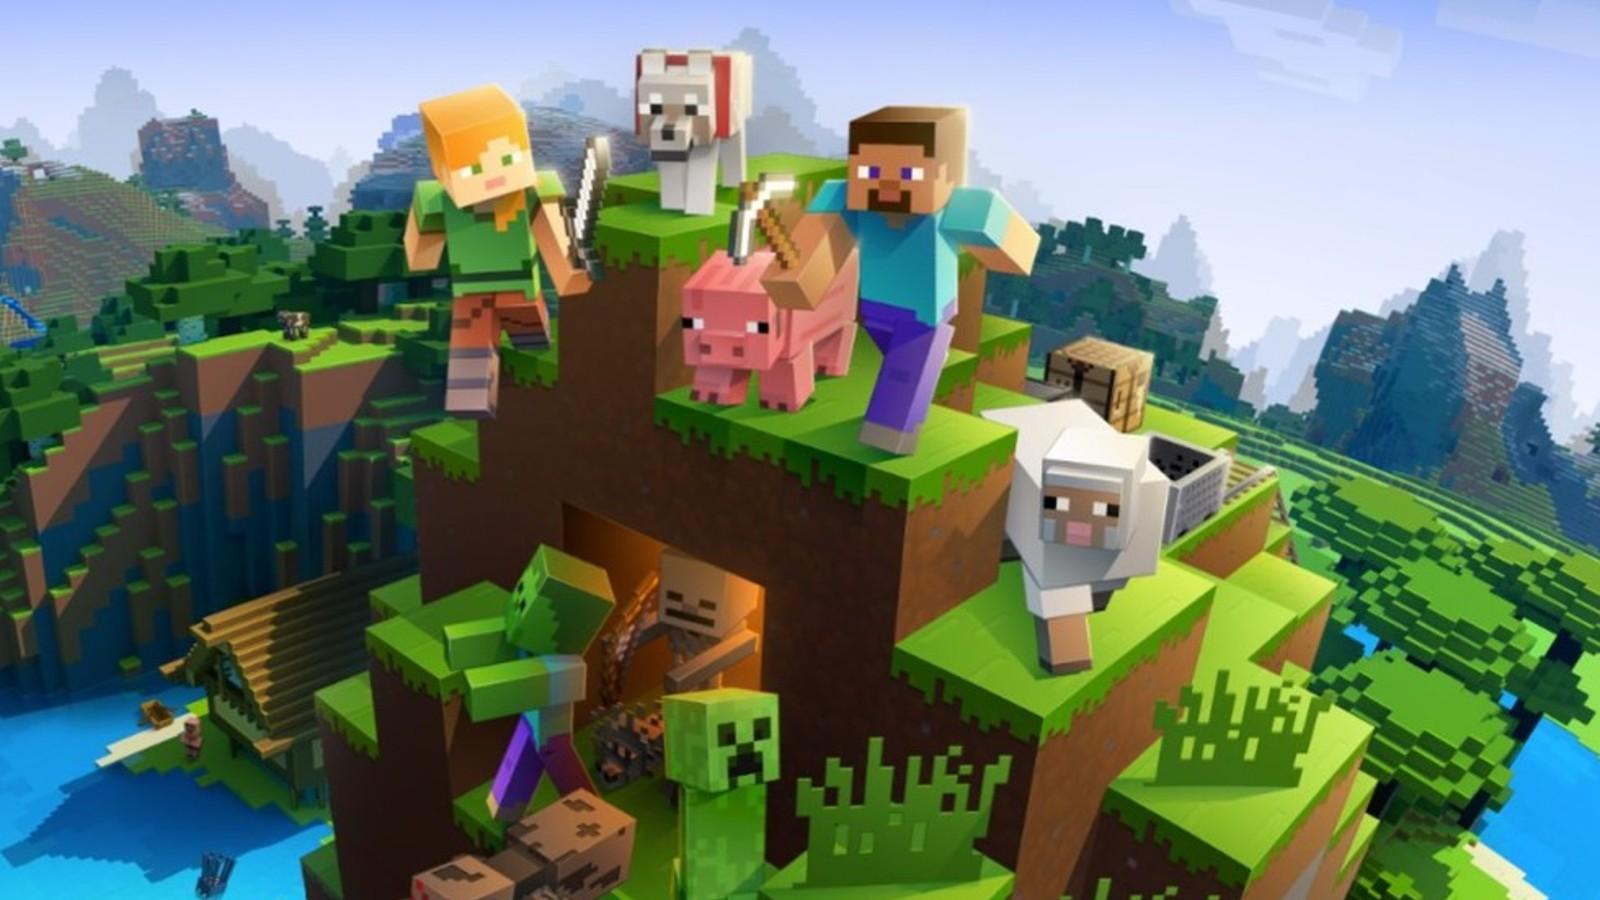 A promotional image from Minecraft a game that includes a narrator.